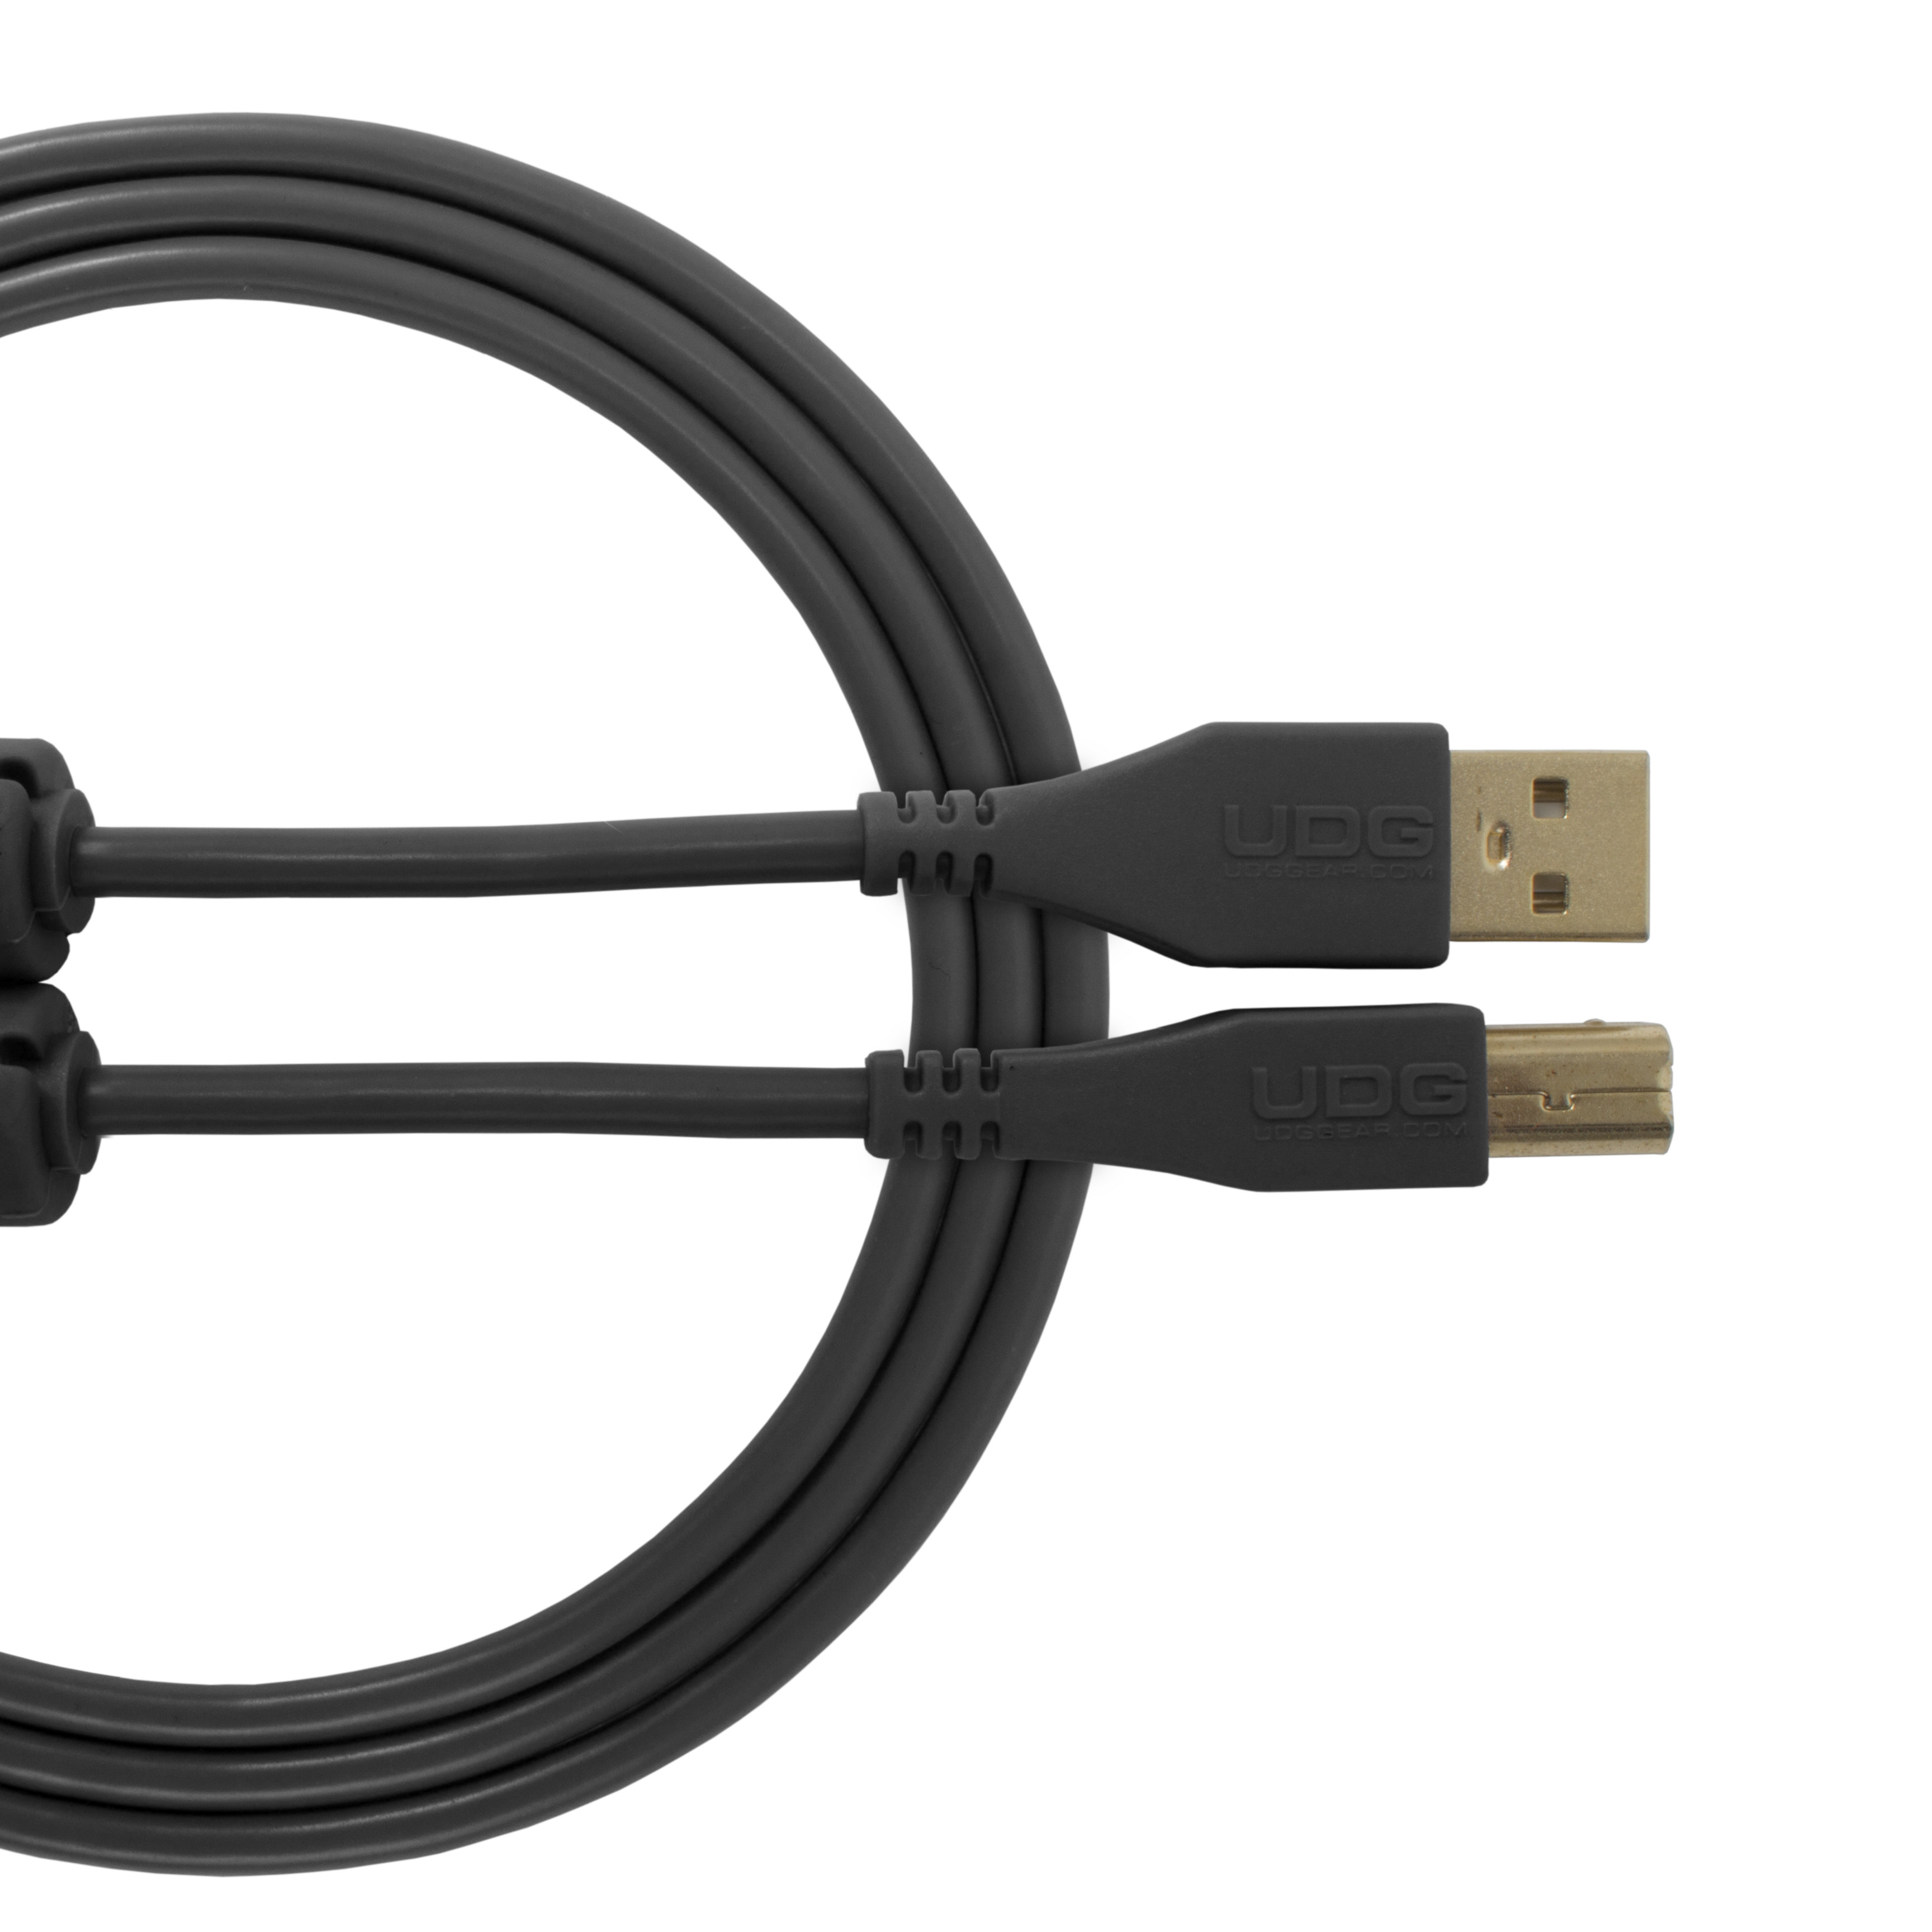 UDG Ultimate Audio Cable USB 2.0 A-B Black Straight 1 m